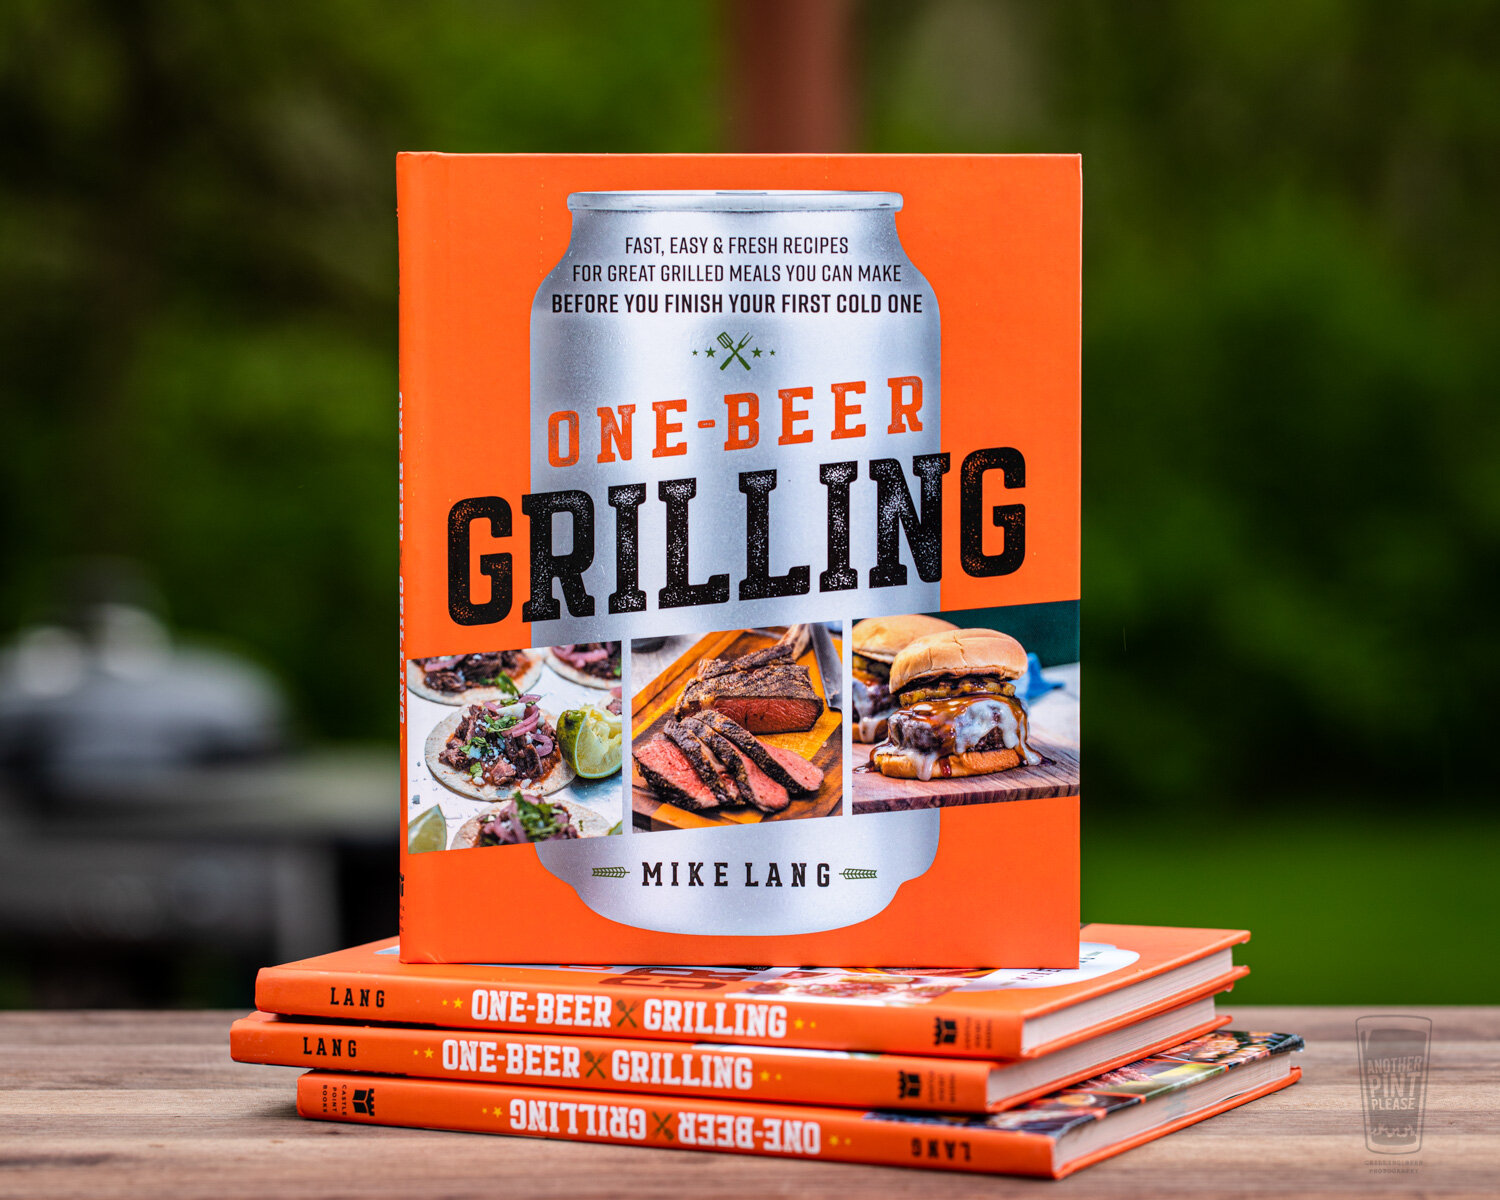 One-Beer Grilling by Mike Lang